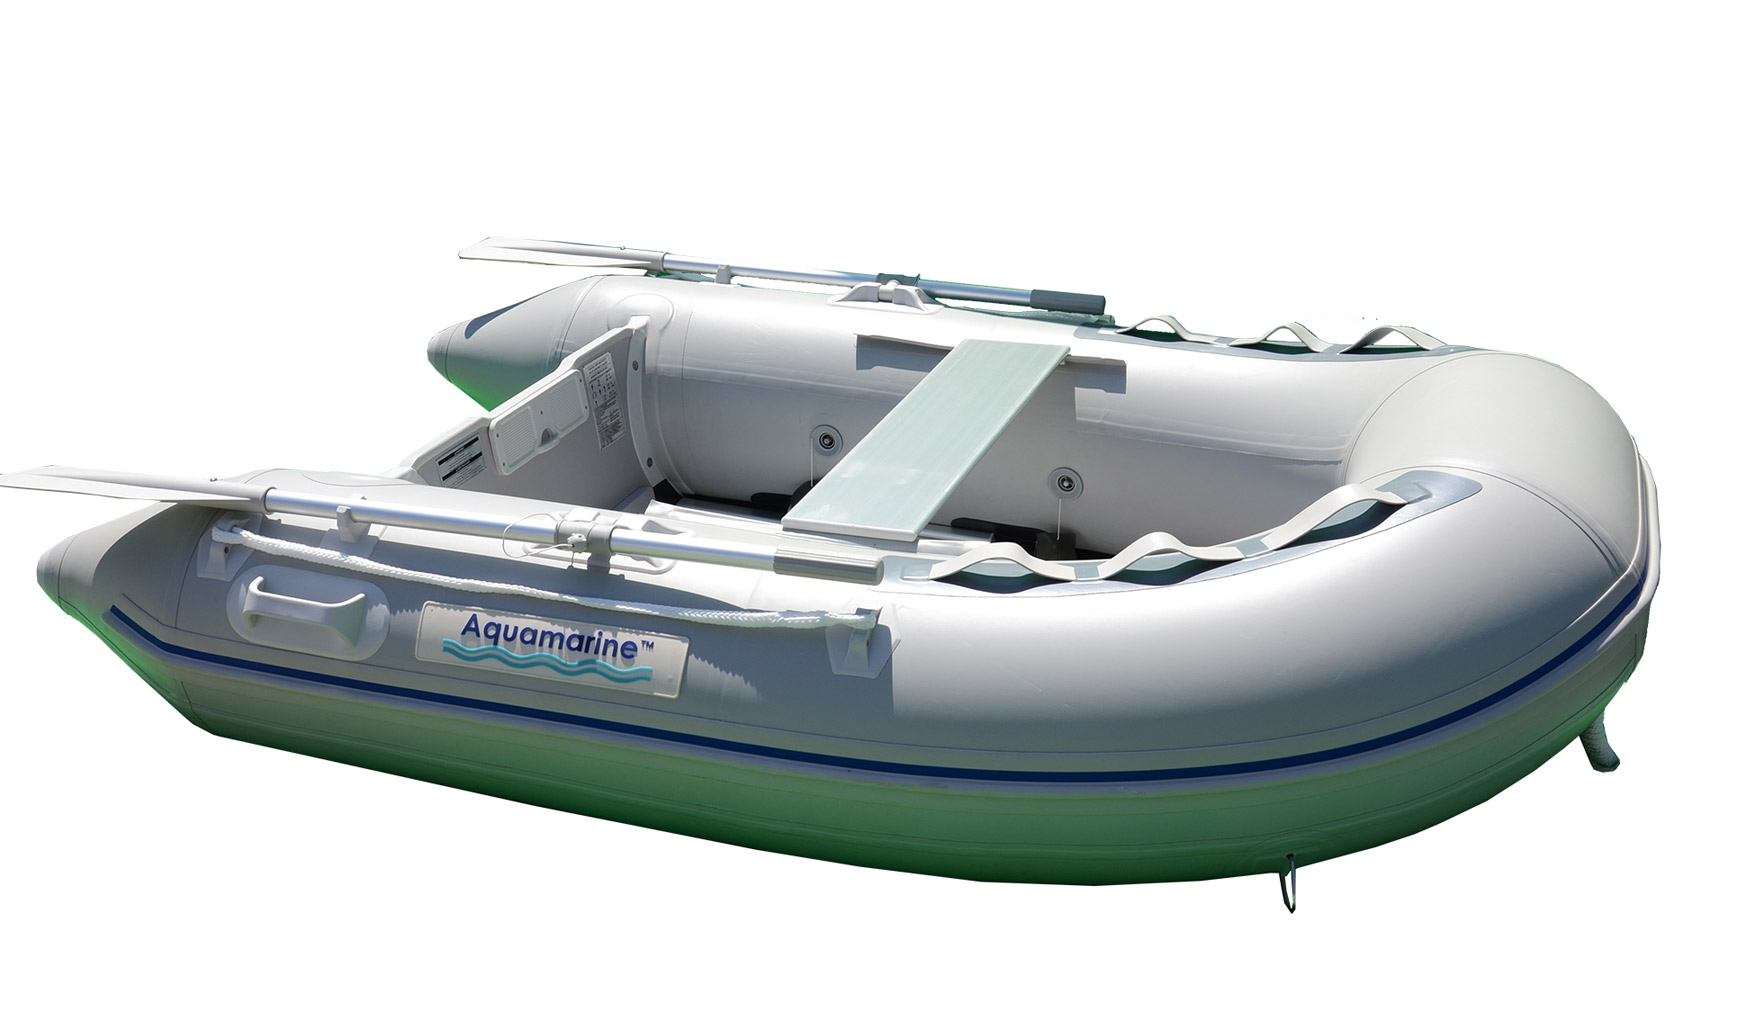 http://www.aquamarineboat.com/images/products/gyp230/7_5ft_inflatable_dinghy_tender_boat_with_plywood_sc.jpg